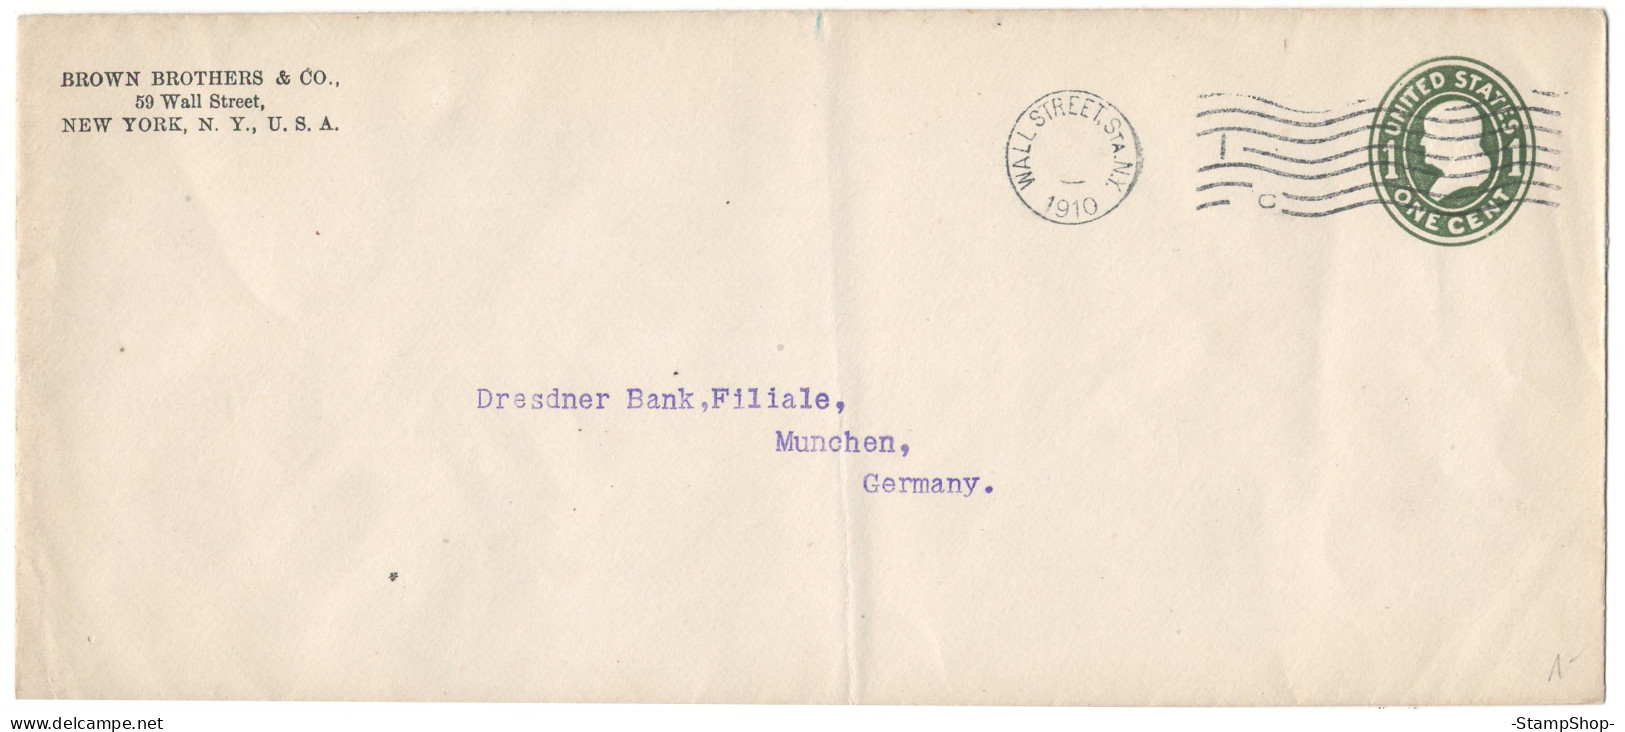 1910 USA, United States, US - Wall Street Station New York To Munich, Germany - Brown Brothers - Stationery, Envelope - - 1901-20